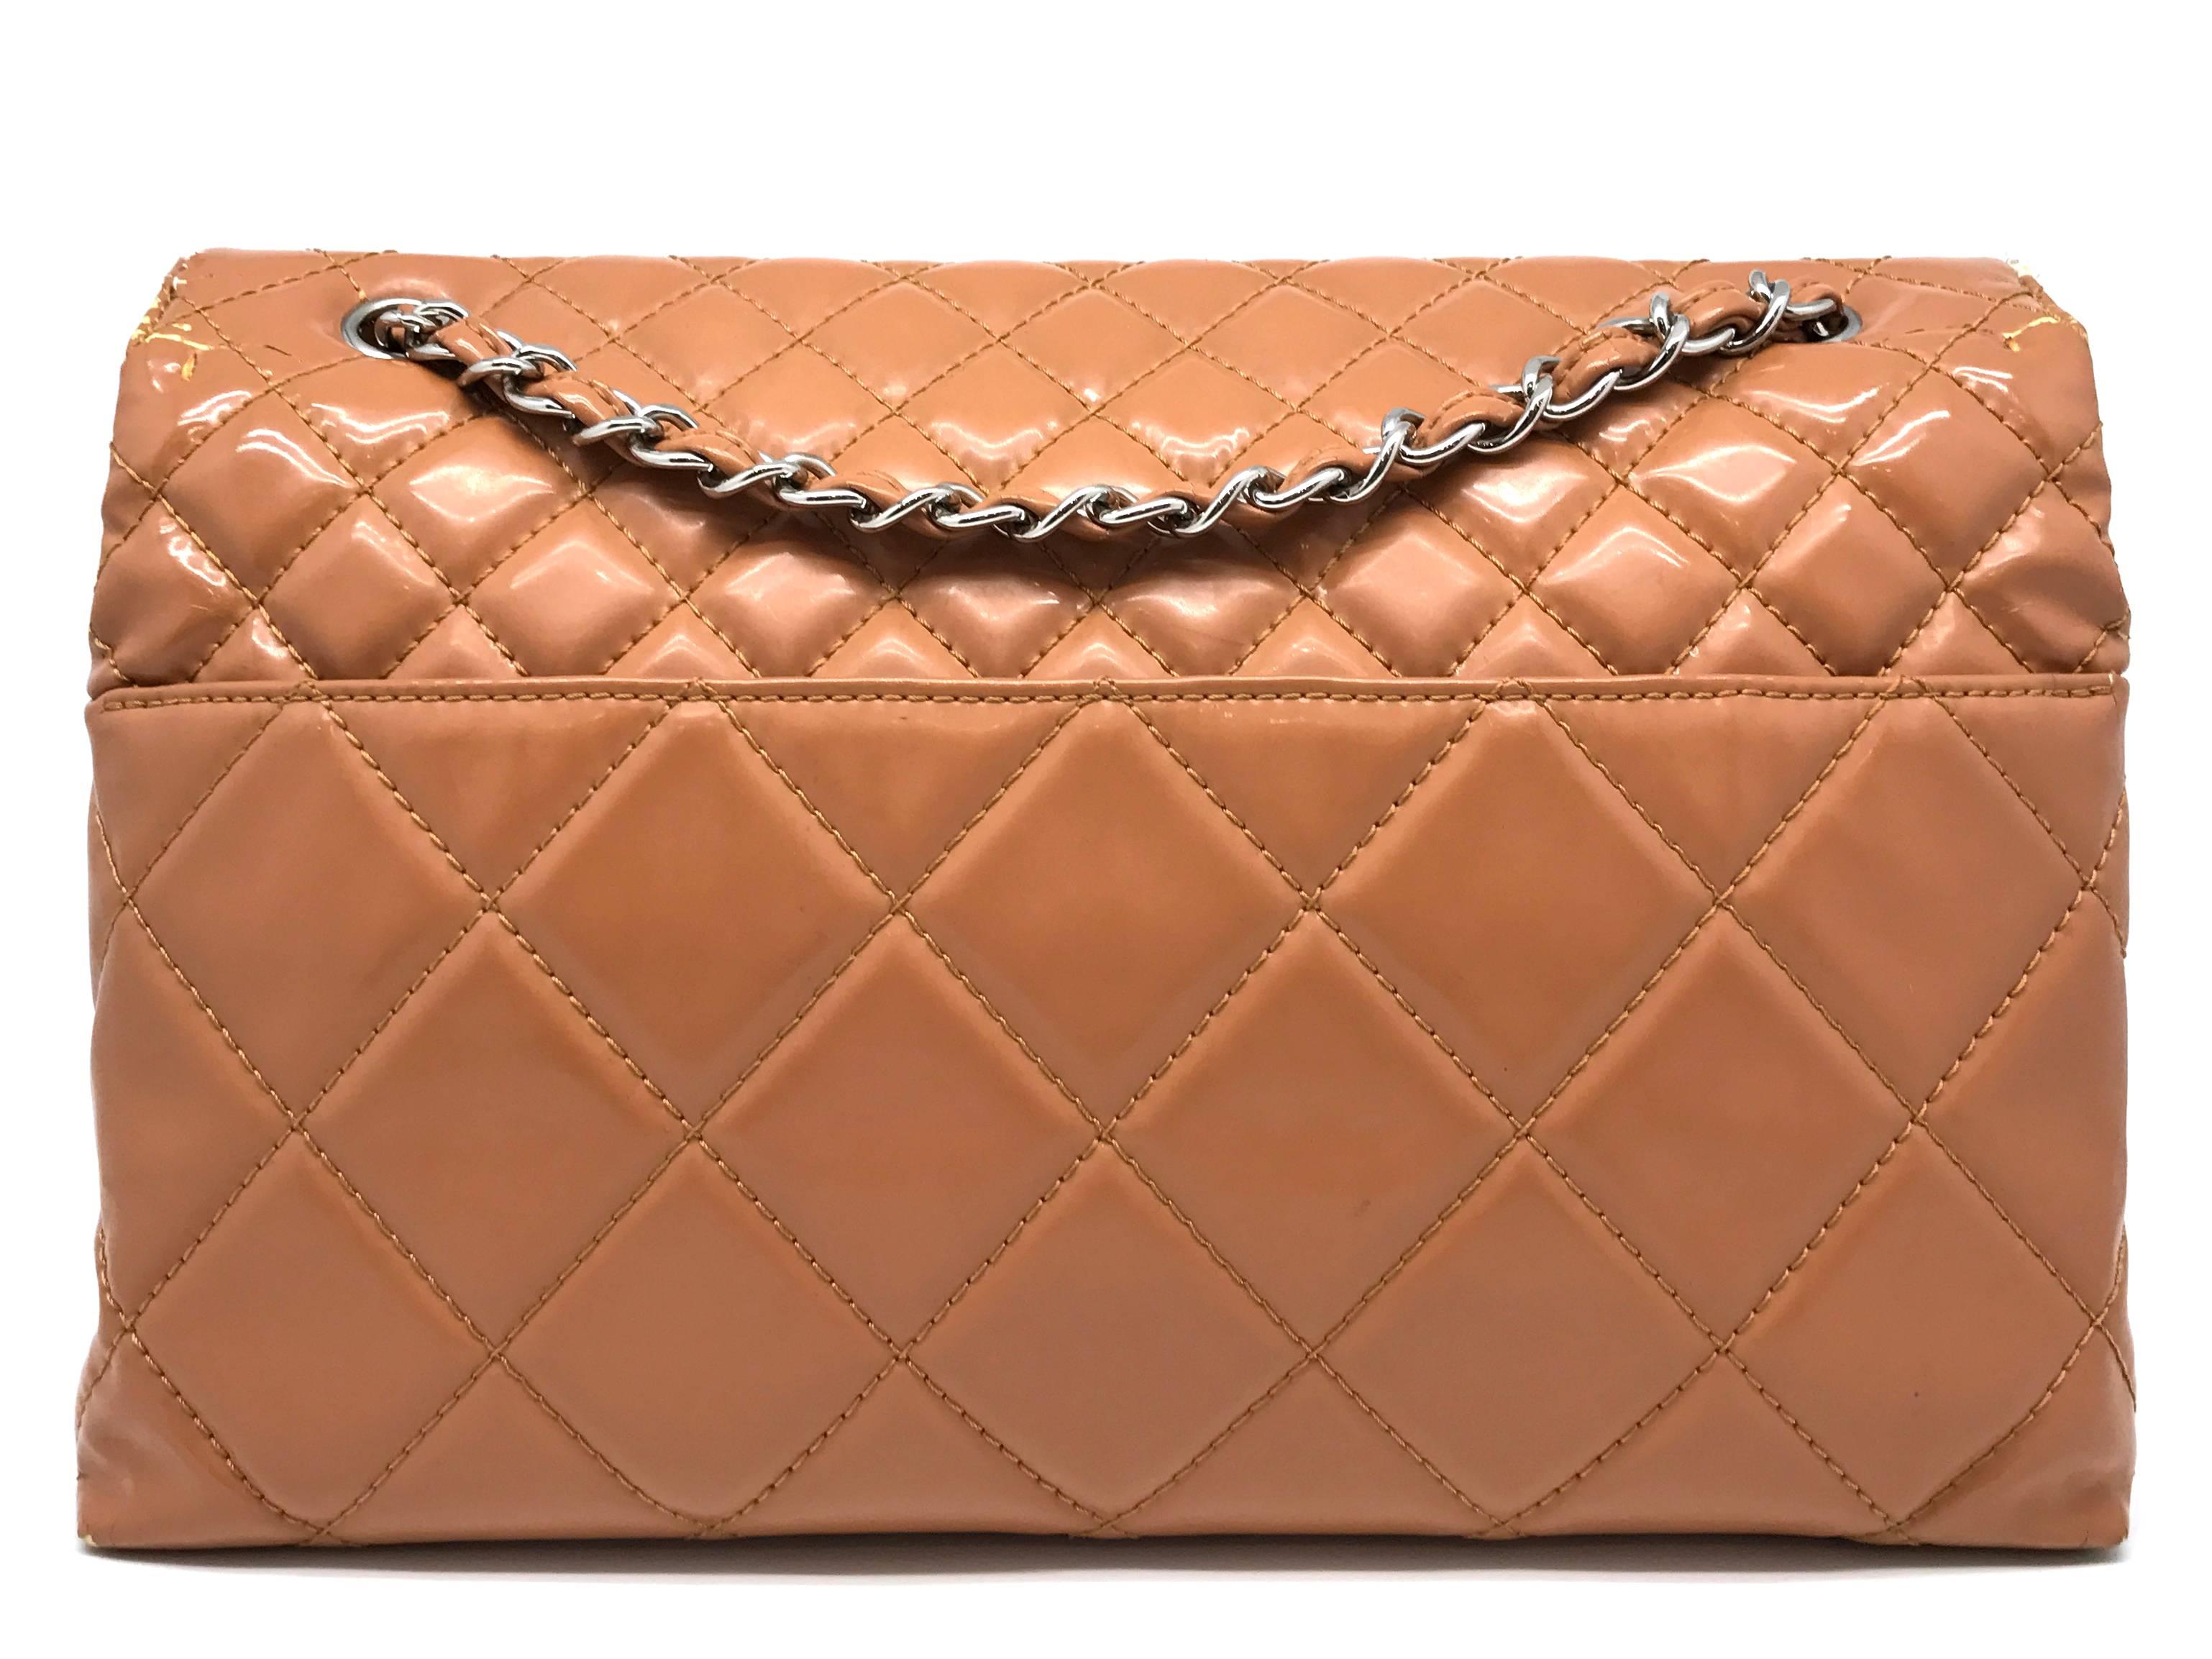 Women's Chanel Orange Quilted Patent Leather SHW Chain Shoulder Bag For Sale